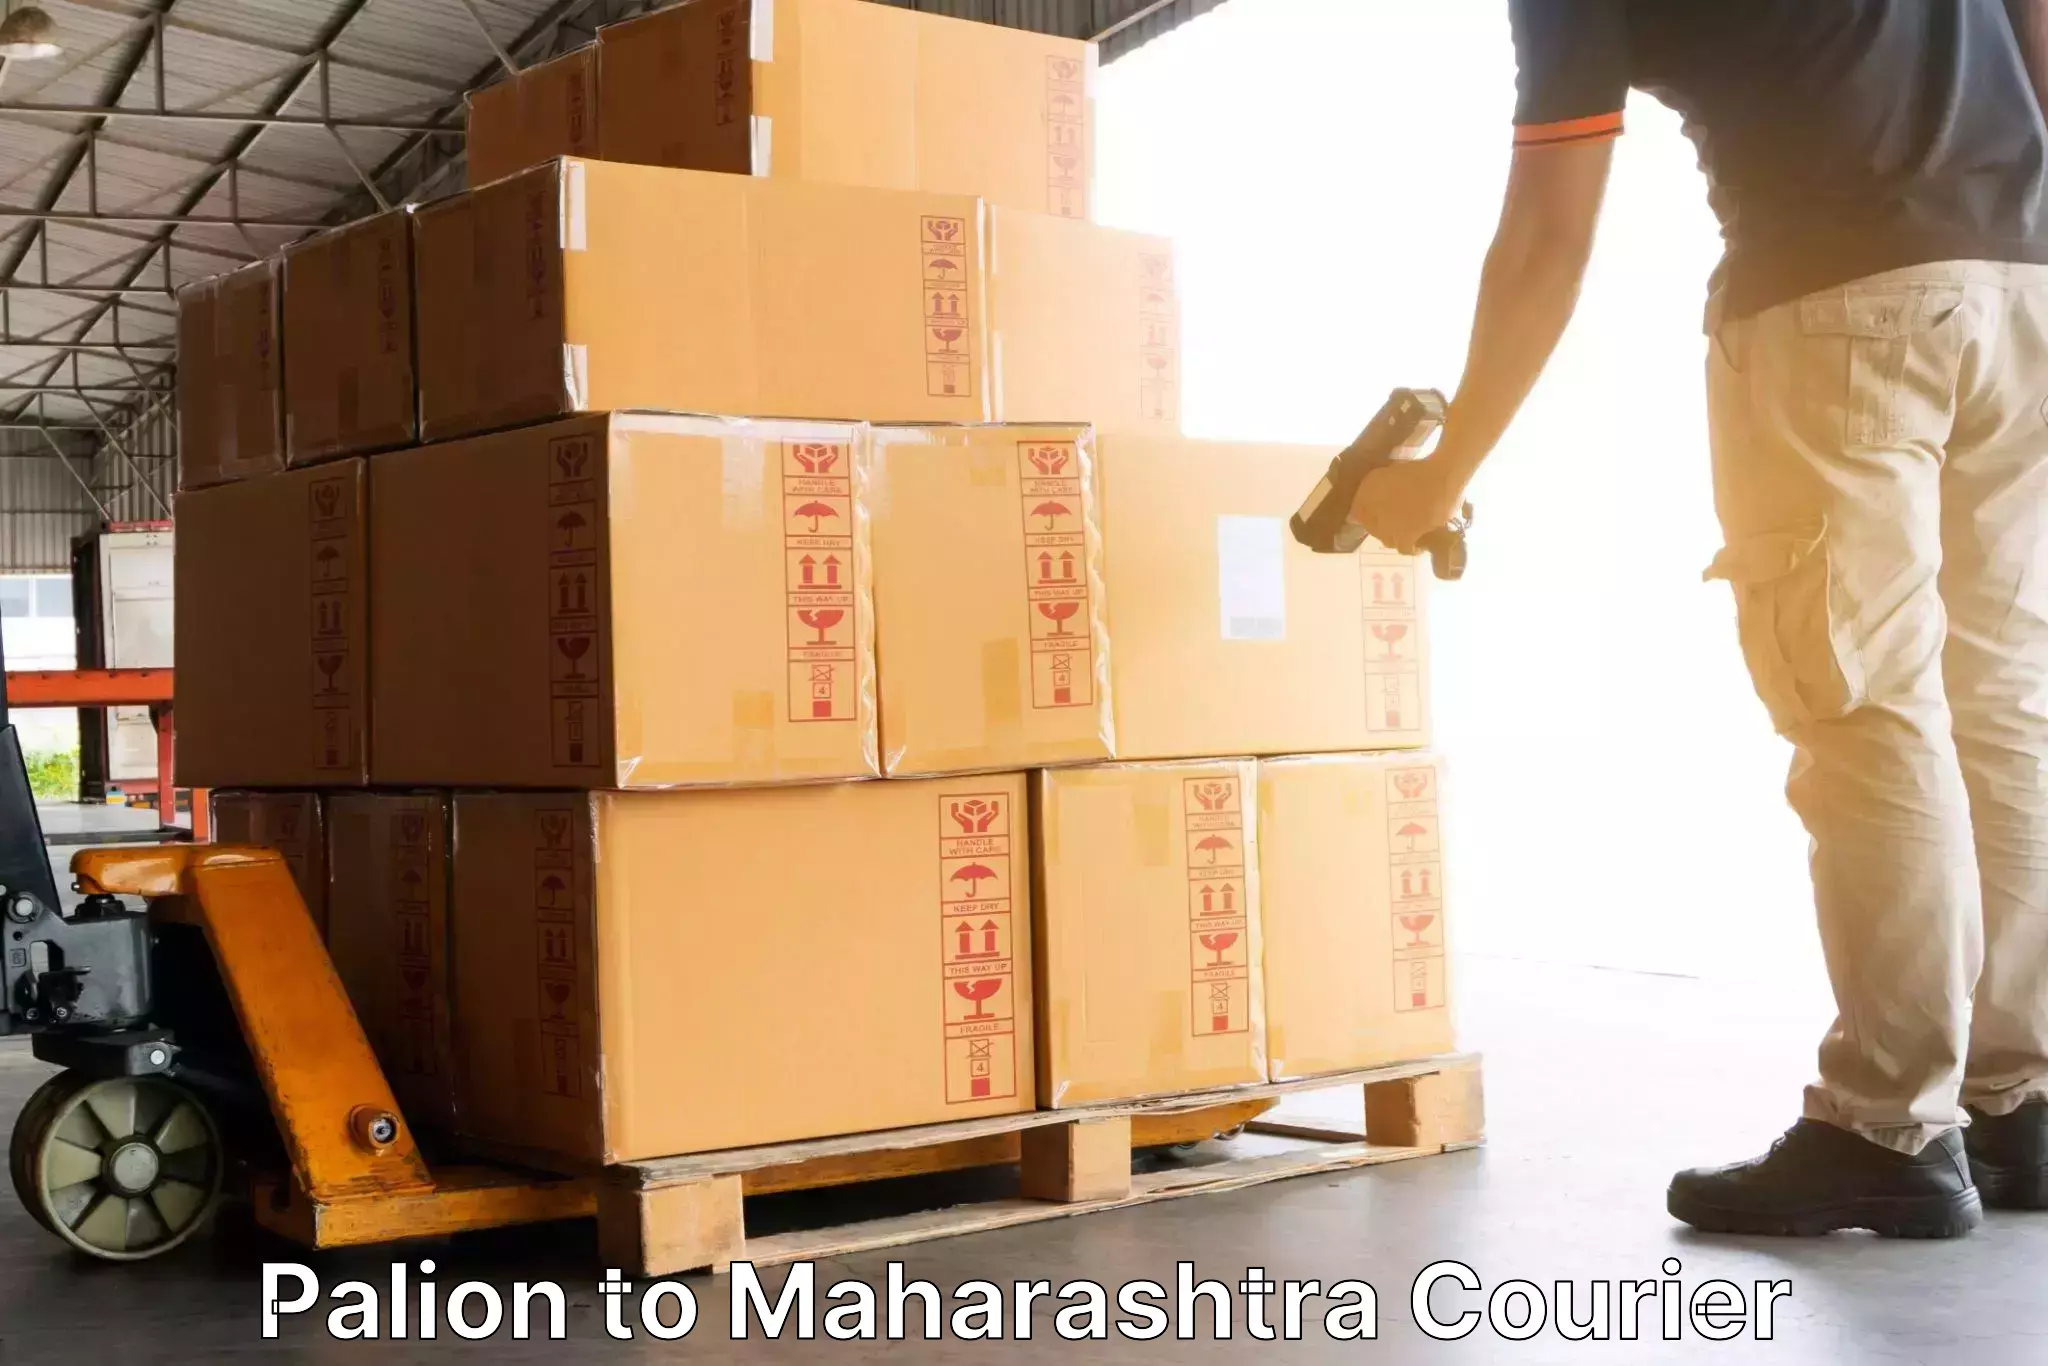 User-friendly courier app Palion to Mumbai Port